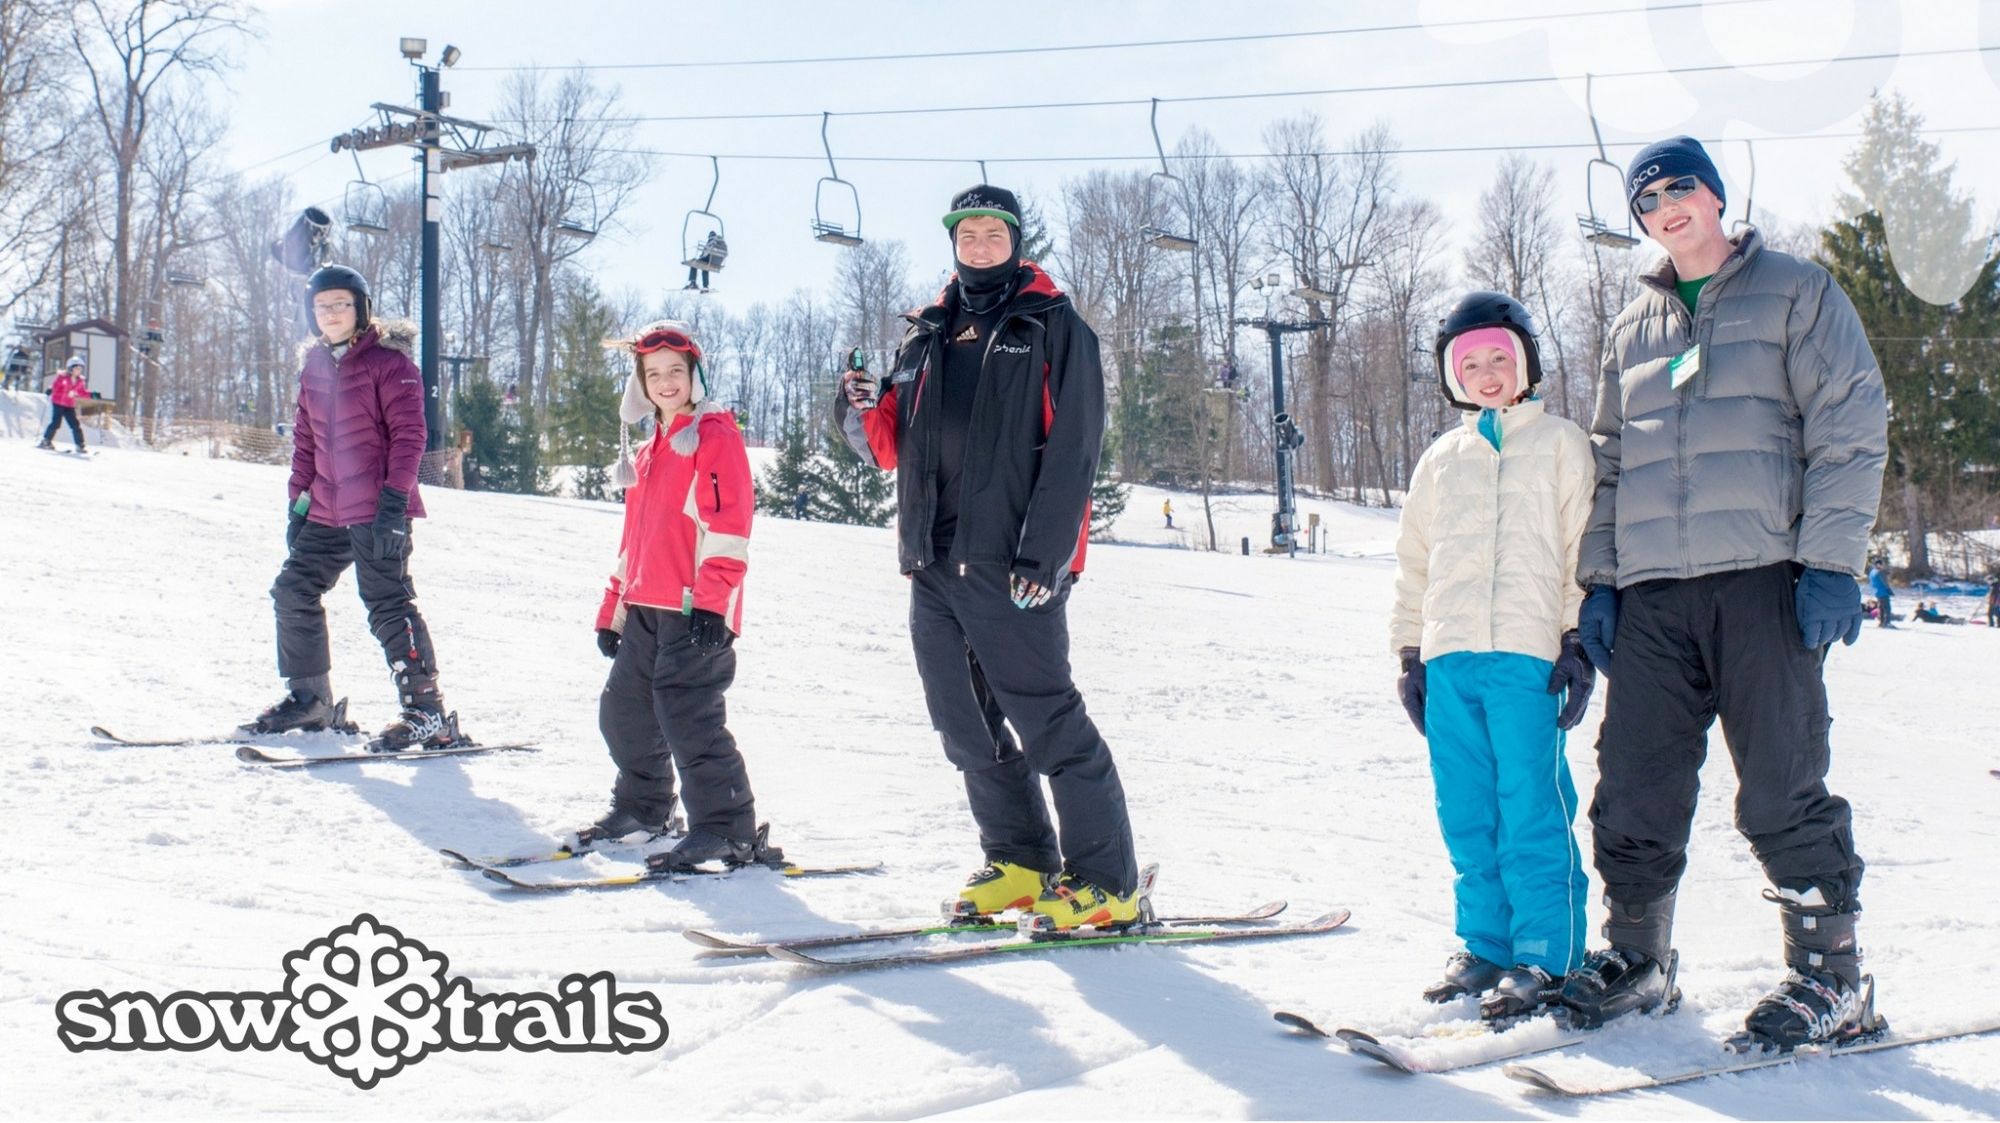 Group Ski Lesson at Snow Trails in Mansfield, Ohio